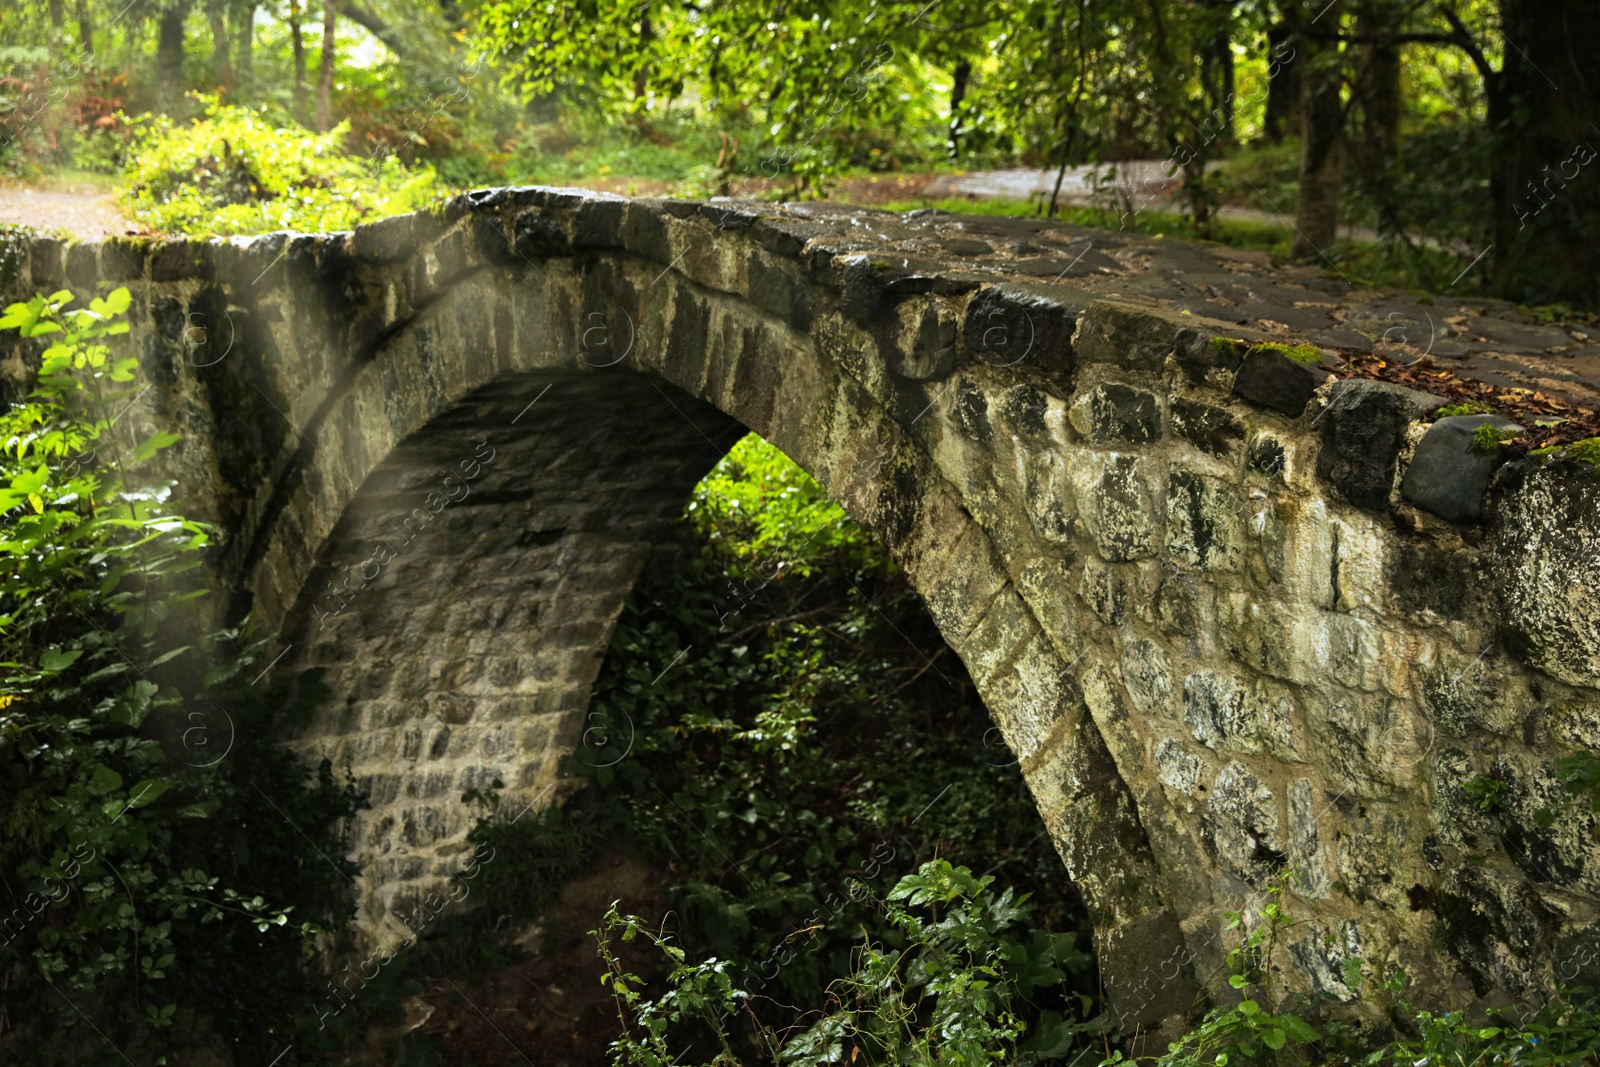 Photo of Beautiful old stone bridge and green trees in park